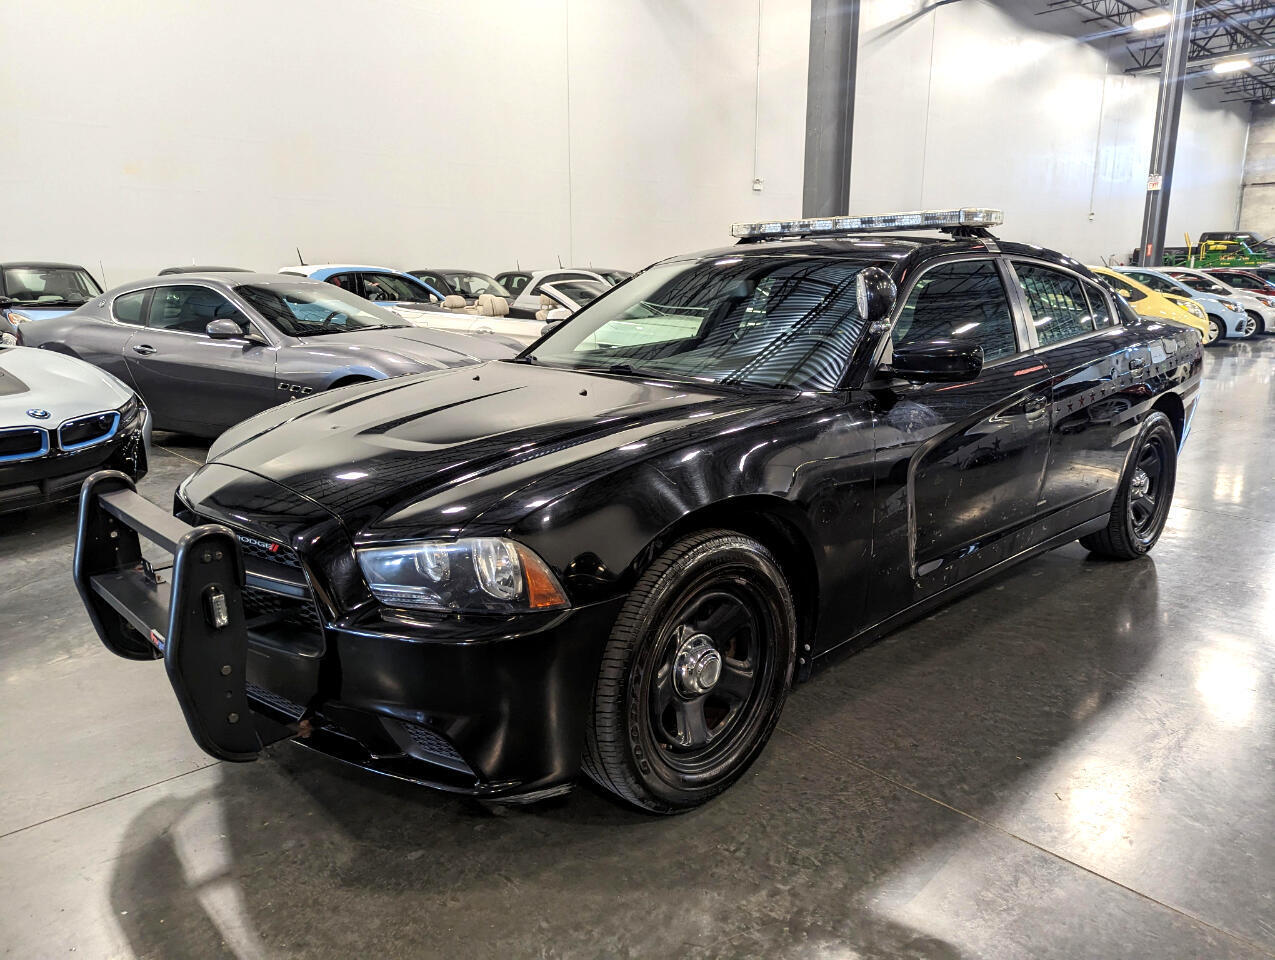 You Can Get Yourself A Dodge Charger Police Car And Play Cop